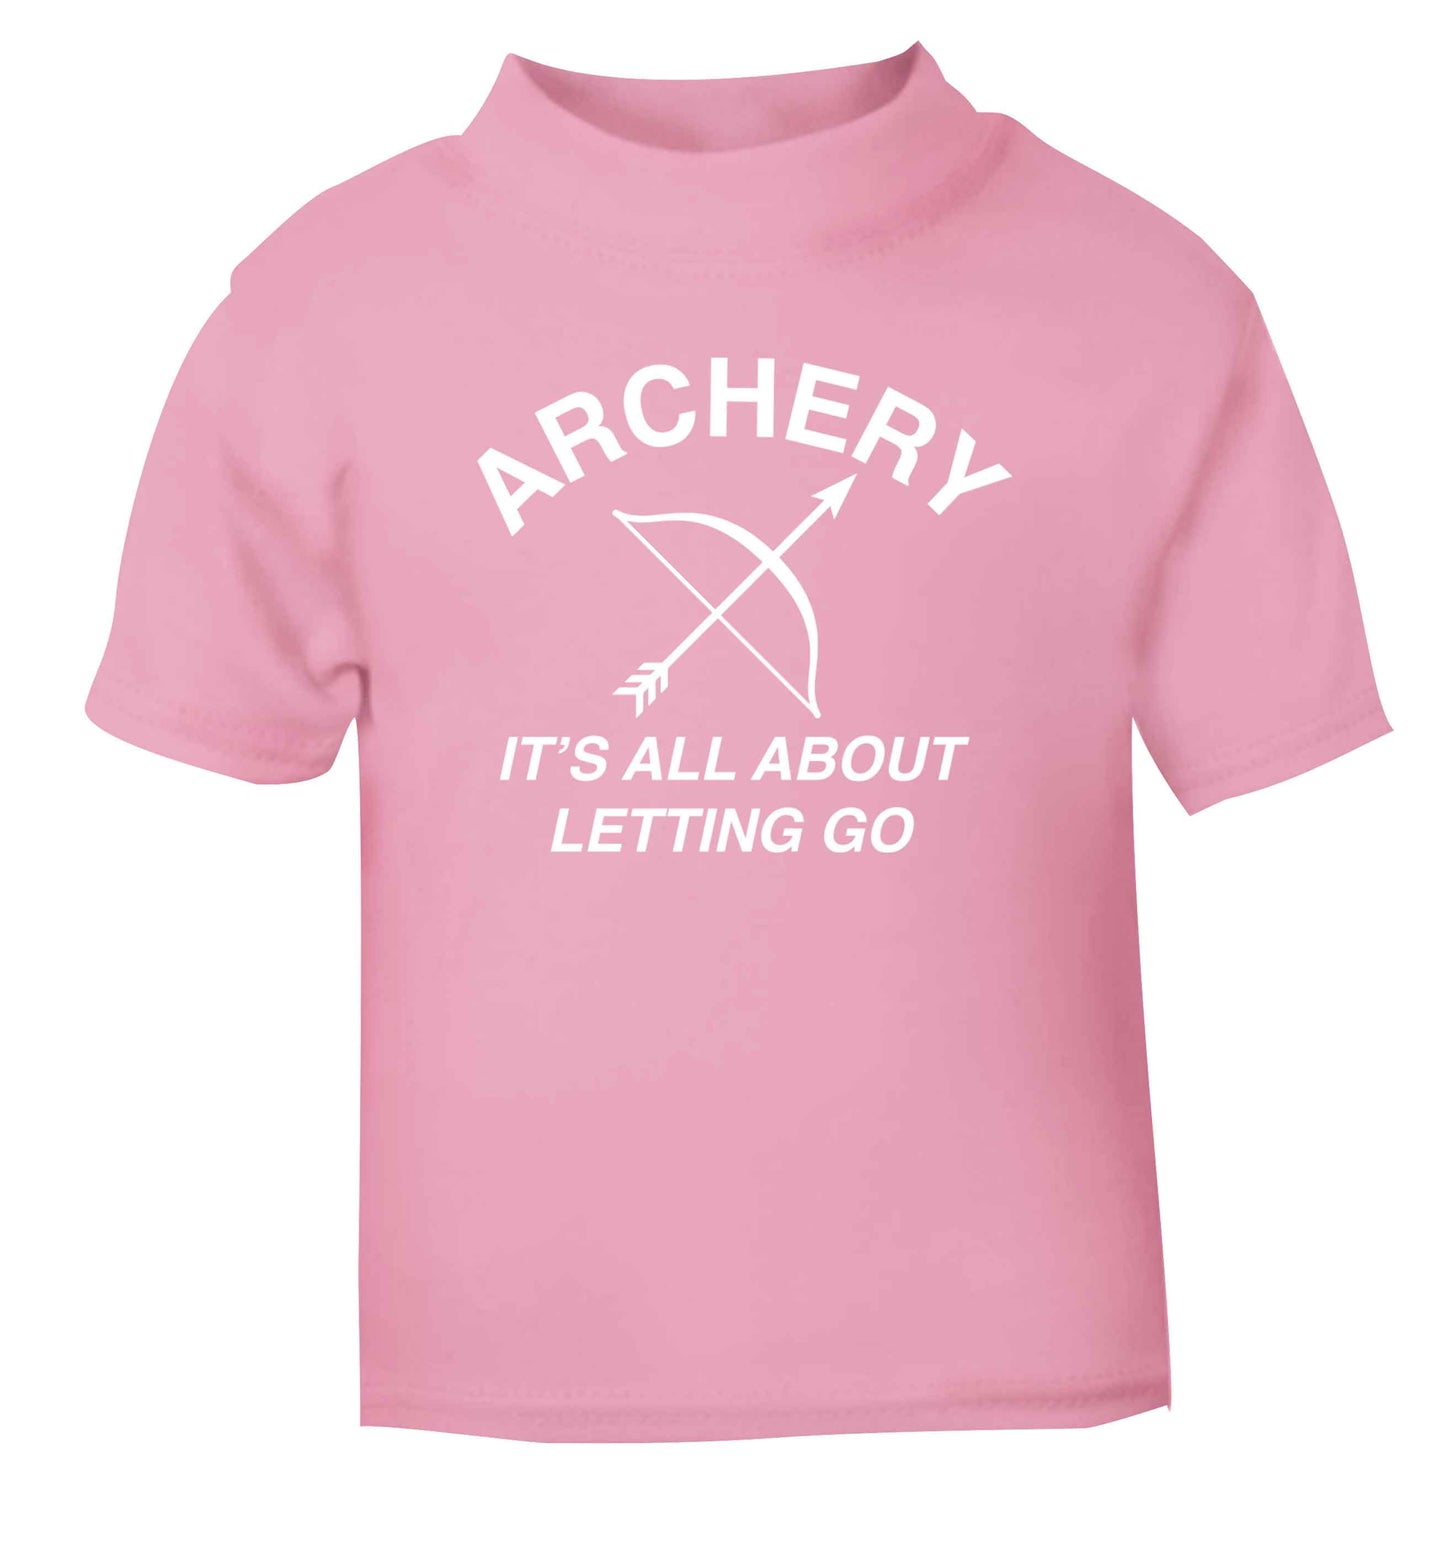 Archery it's all about letting go light pink Baby Toddler Tshirt 2 Years